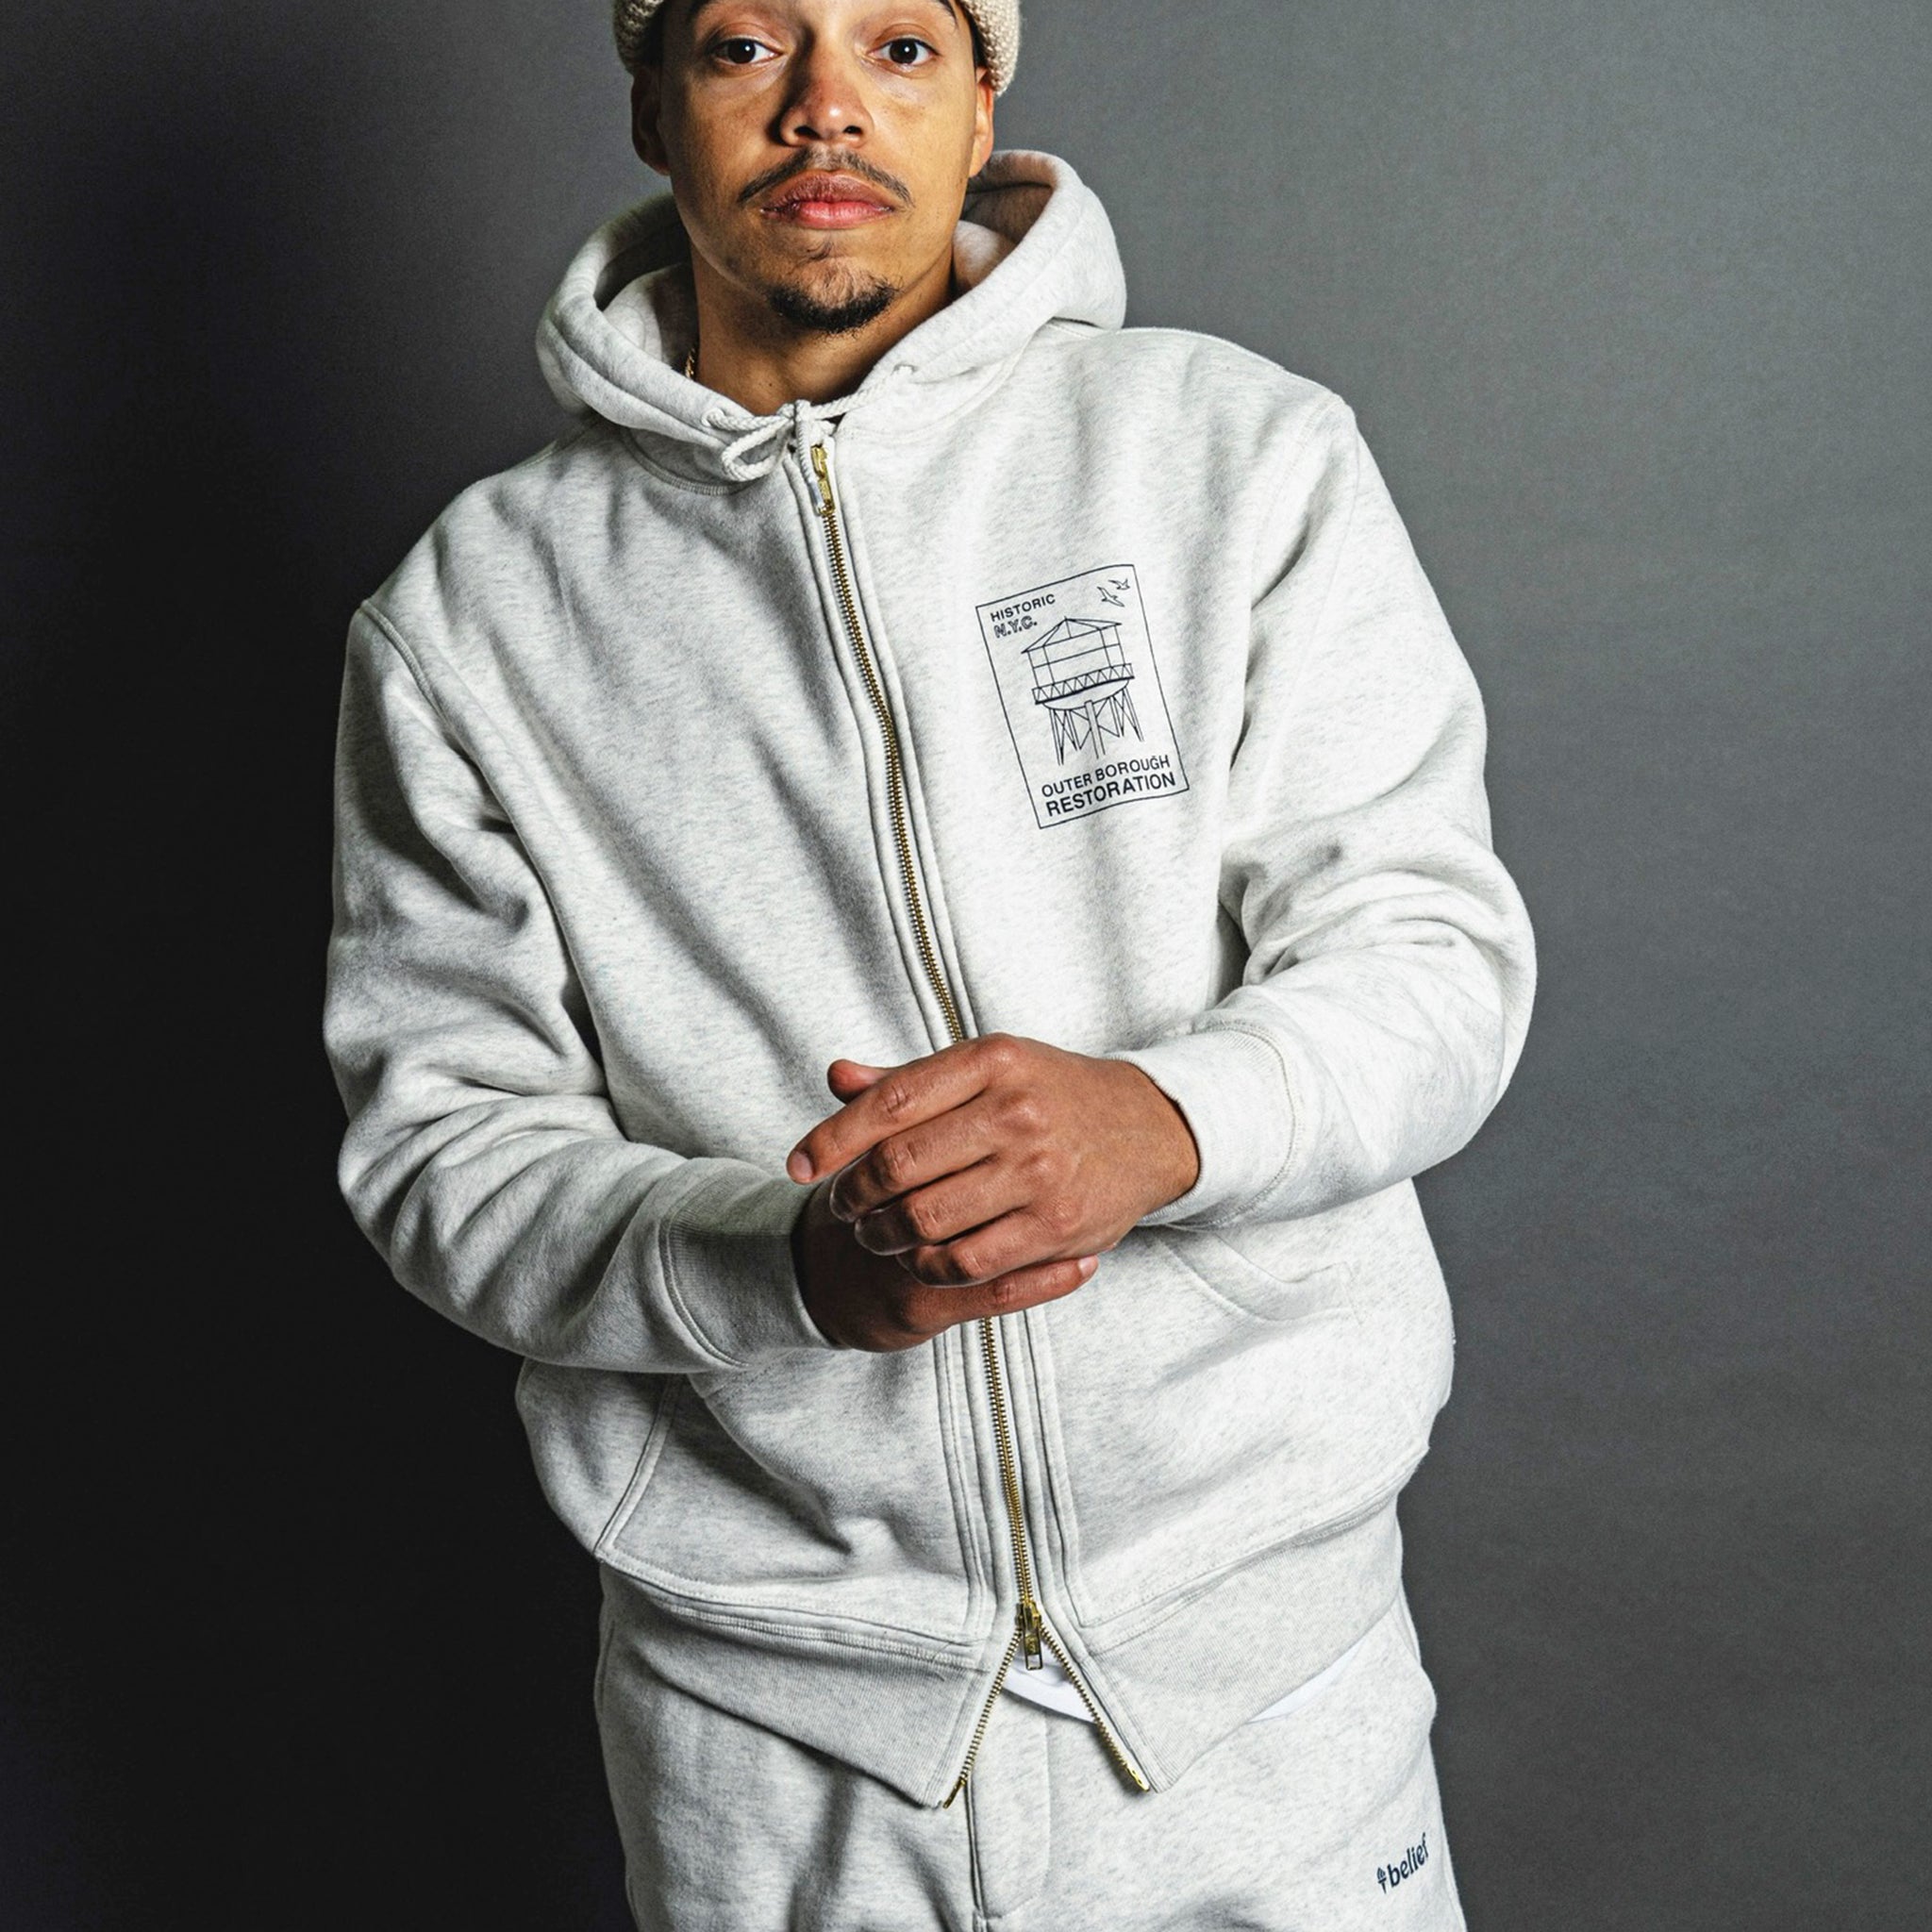 Thermal Lined Zip Hoody - Oatmeal Heather